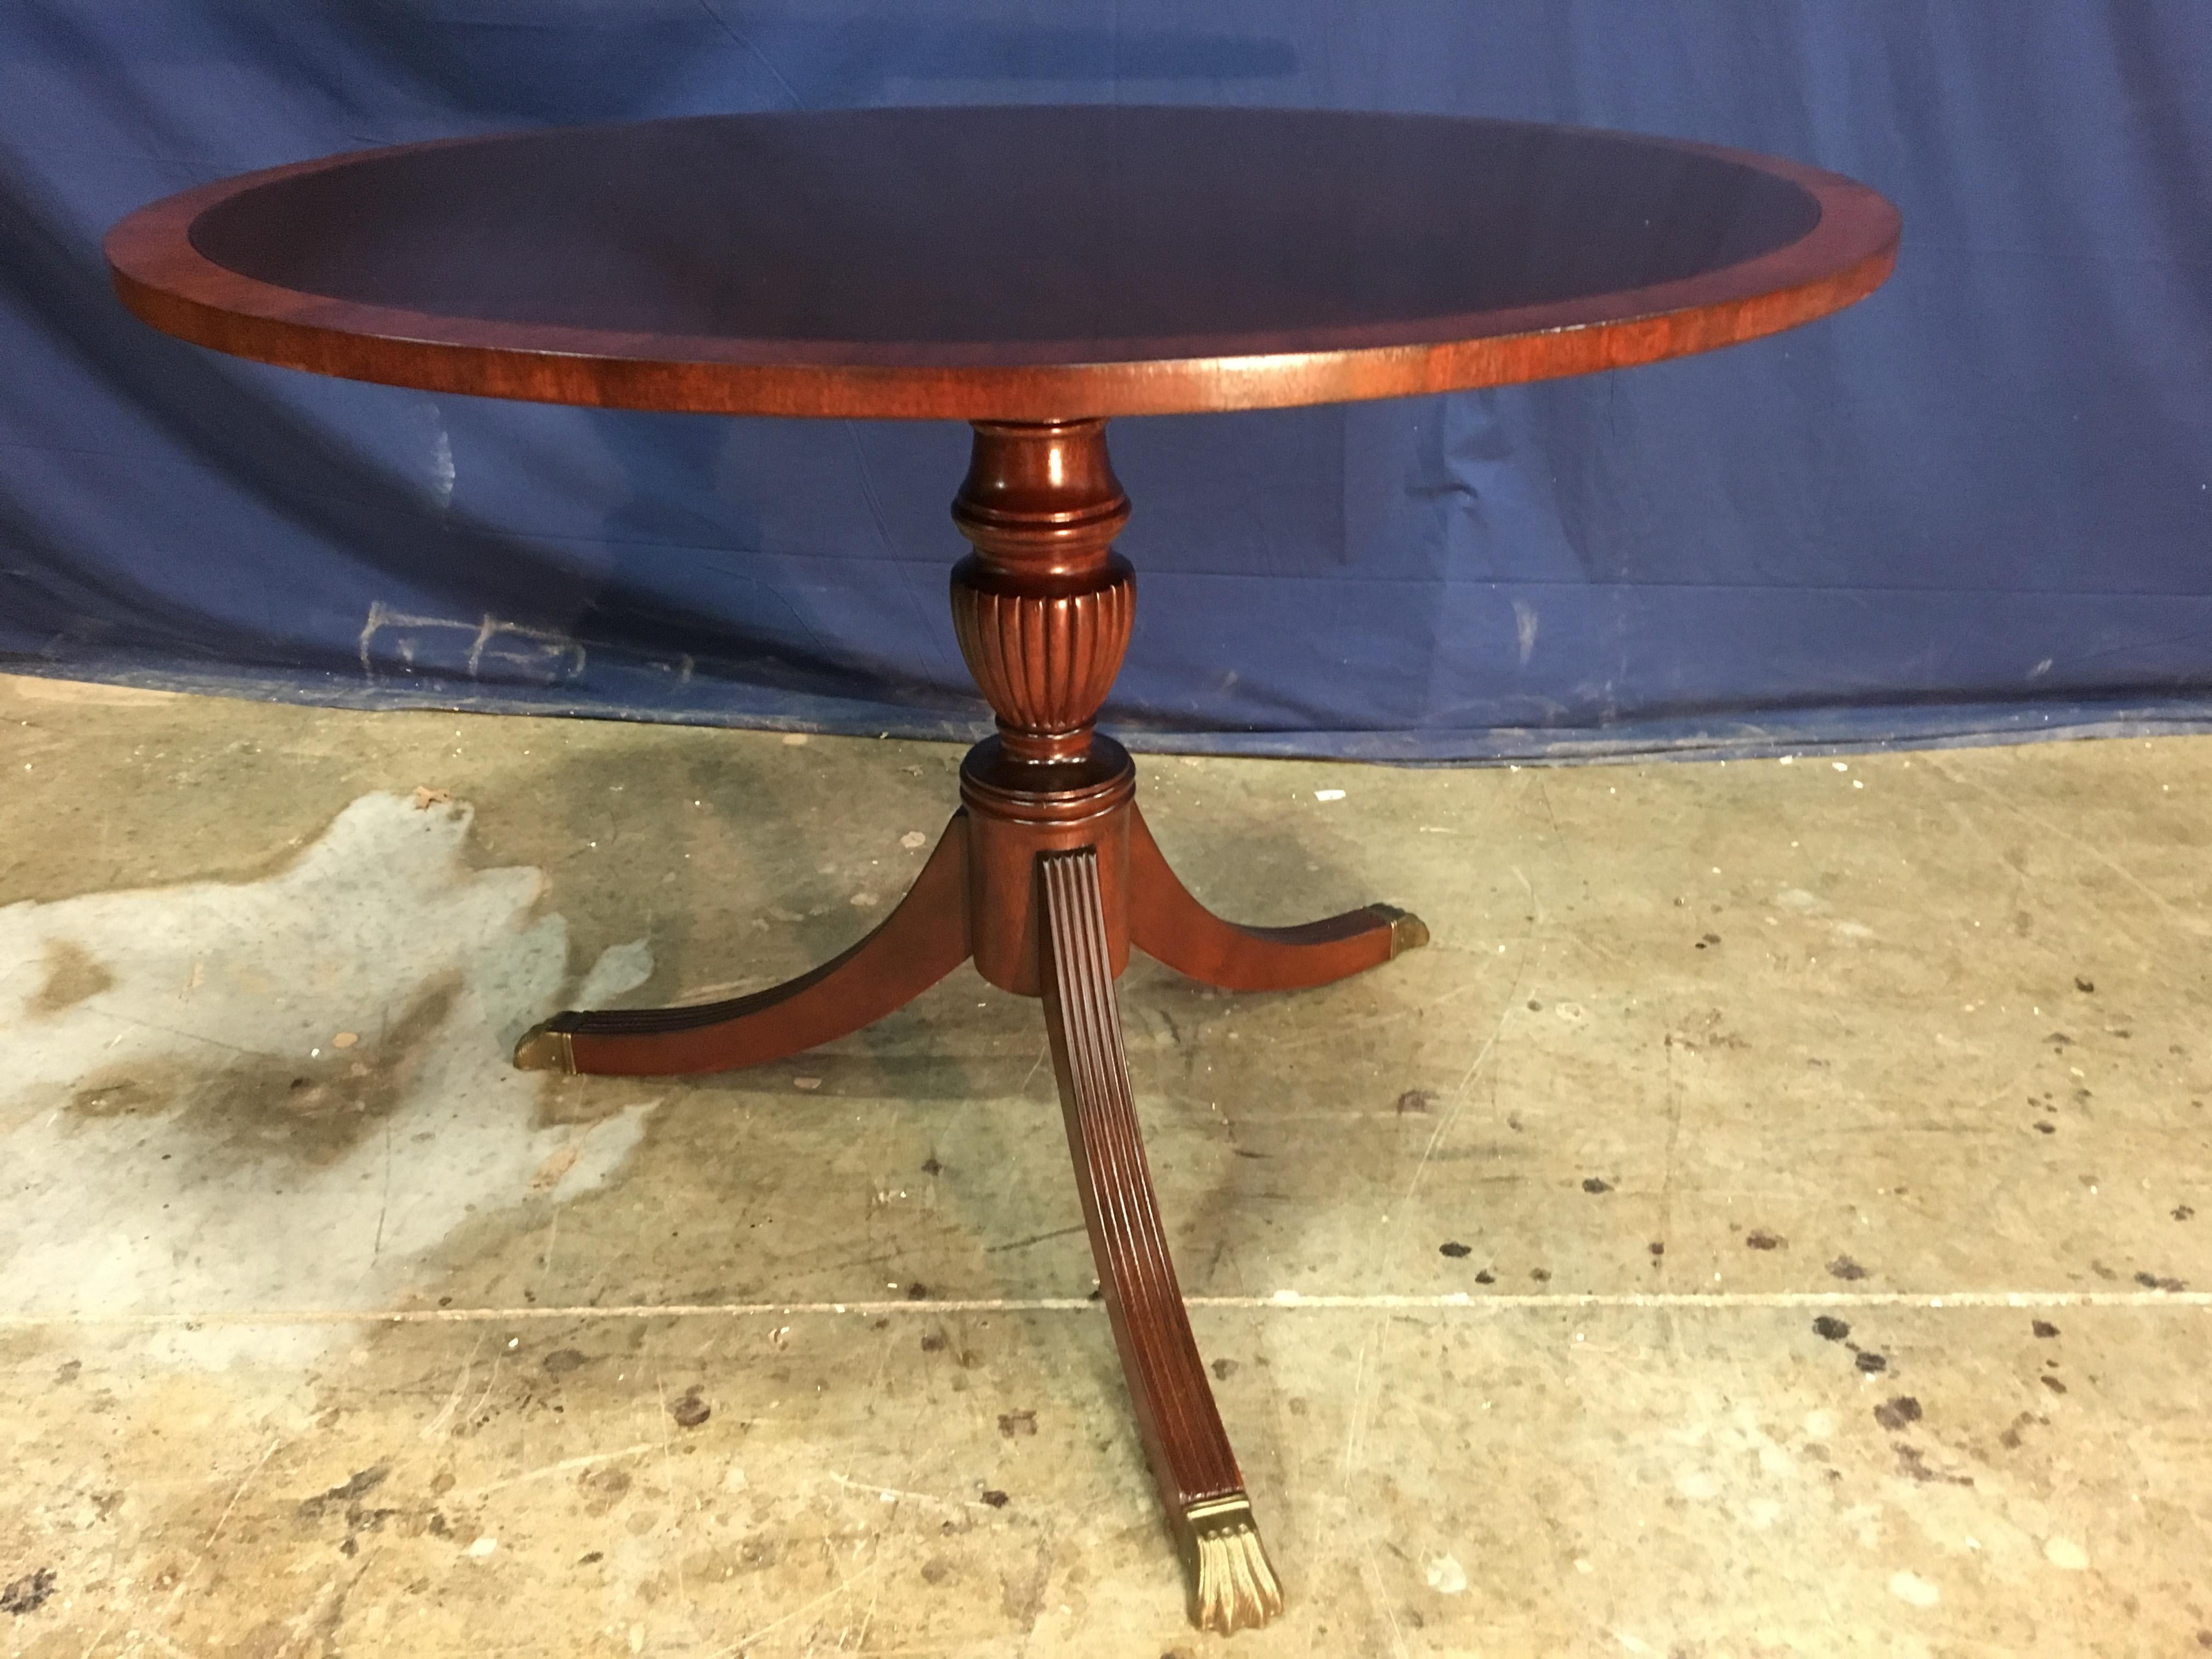 This is made-to-order round traditional mahogany accent/foyer table made in the Leighton Hall shop. It features a field of cathedral mahogany with a contrasting mahogany border. It has a hand rubbed and polished semigloss finish. The pedestal has